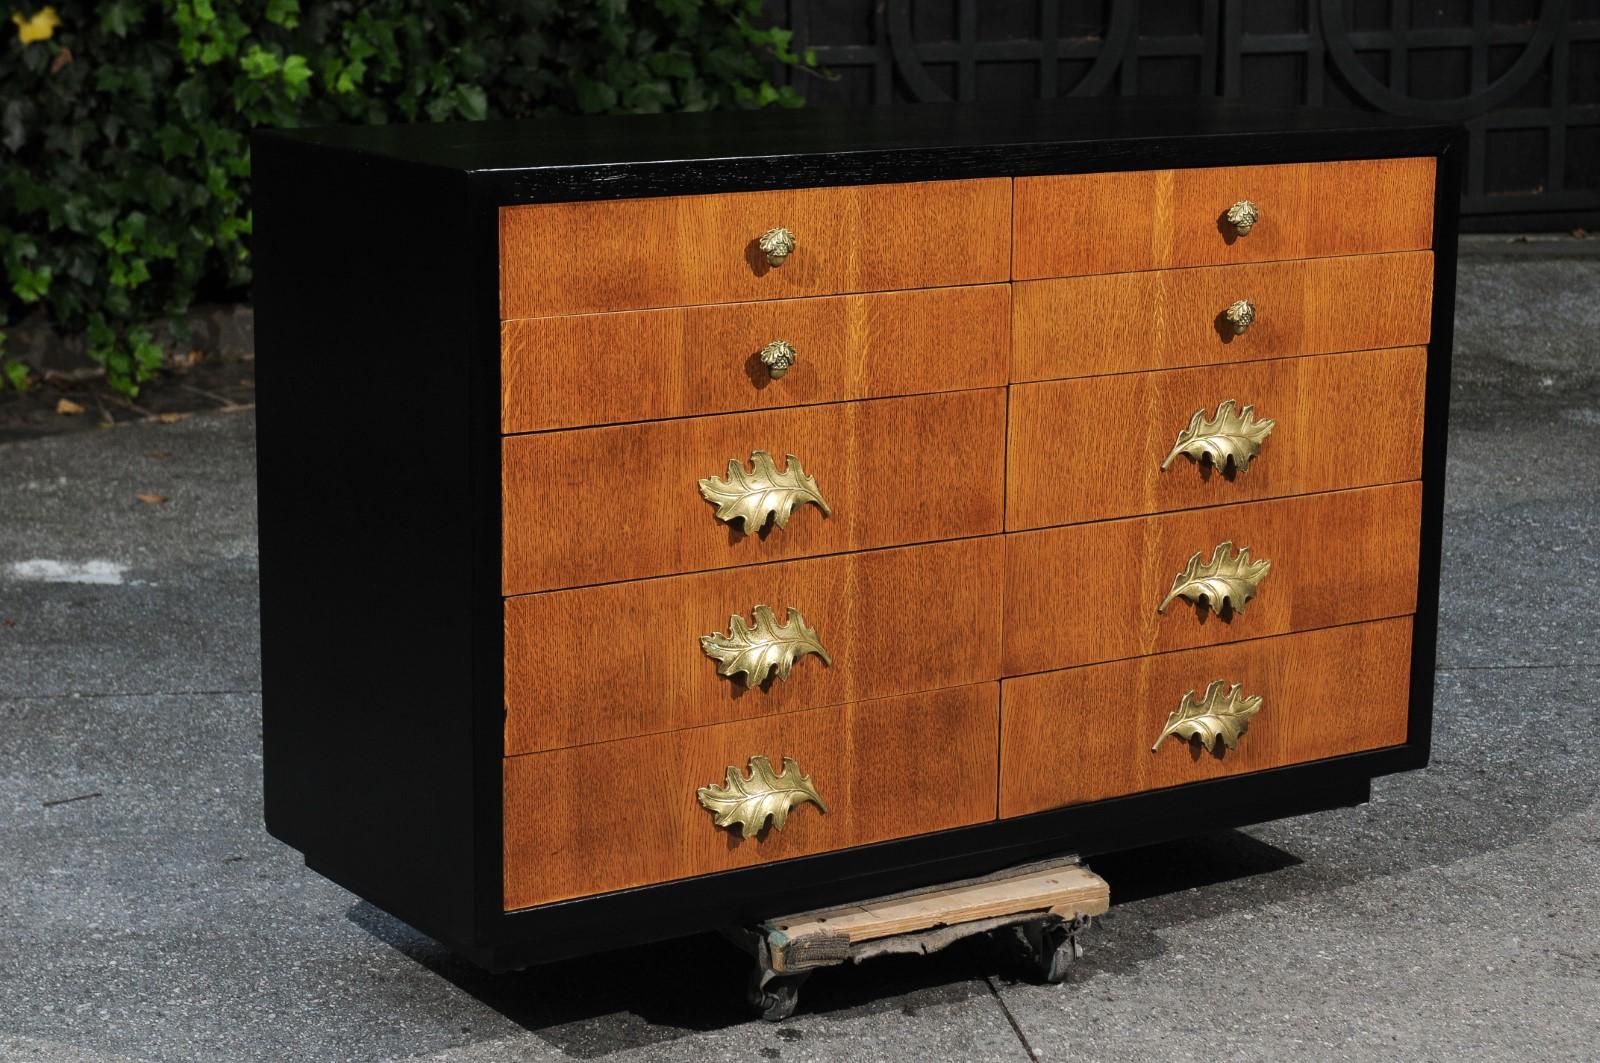 A breathtaking rare commode by Lorin Jackson for Grosfeld House. This stunning example, model number 3955, can be found in the August, 1947 Grosfeld House catalog. Exceptionally crafted Cerused oak case construction finished in Ebony, with drawer